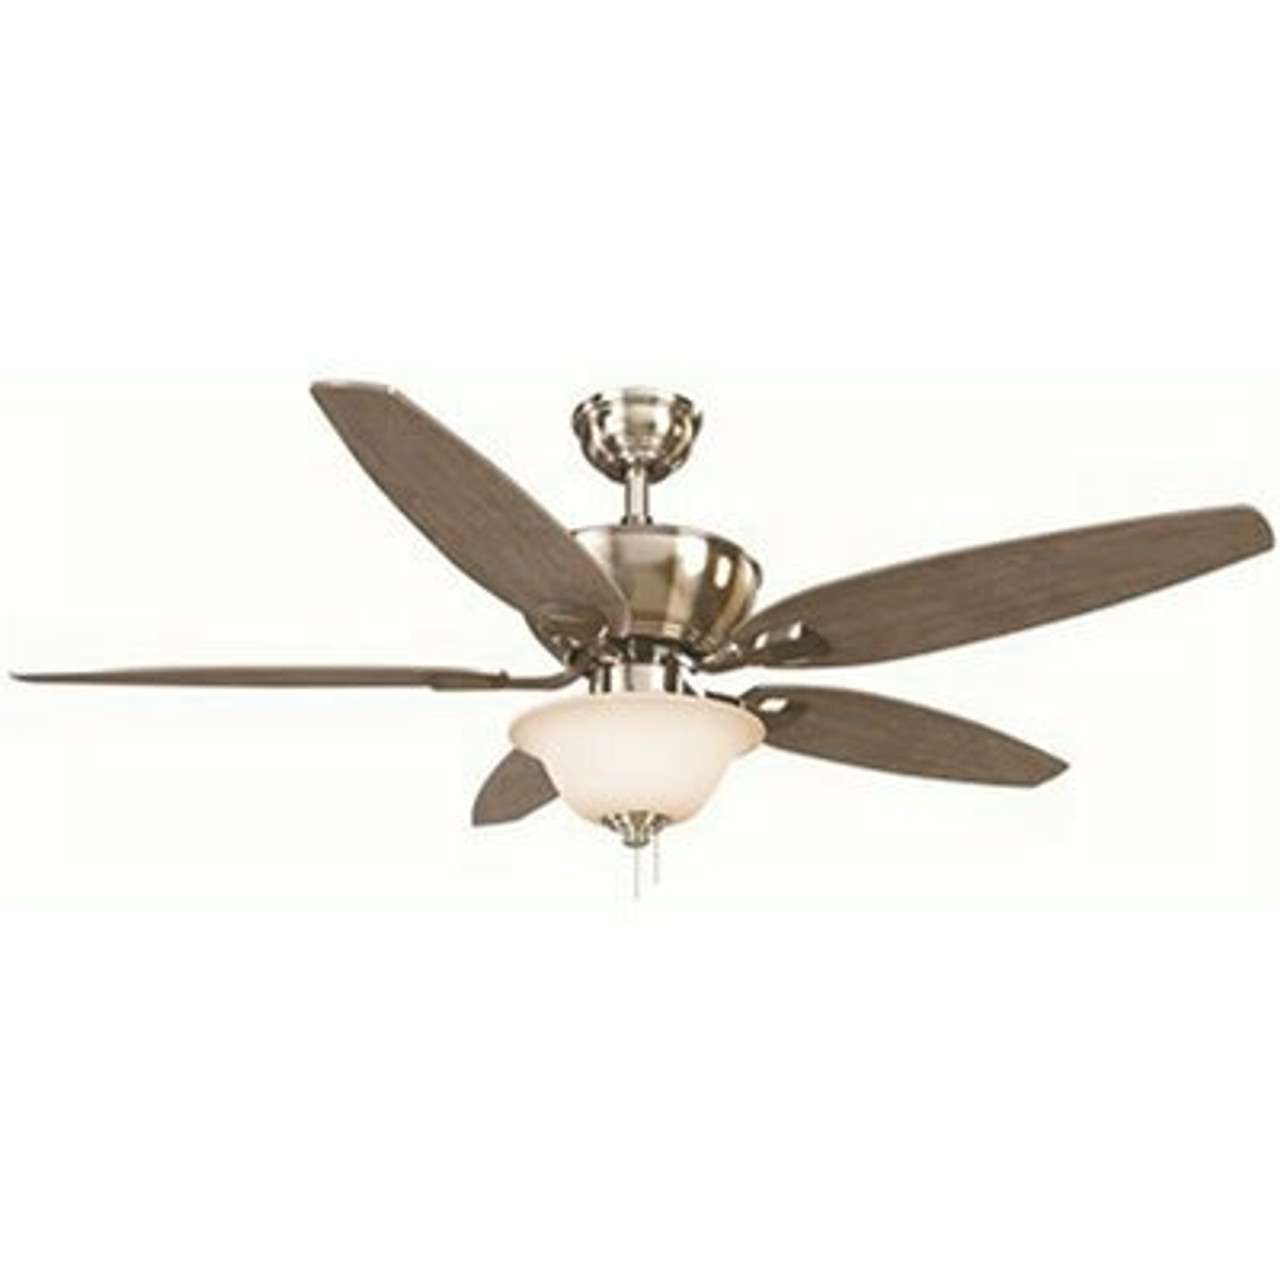 Hampton Bay Carrolton II 52 In. Led Indoor Brushed Nickel Ceiling Fan With Light Kit